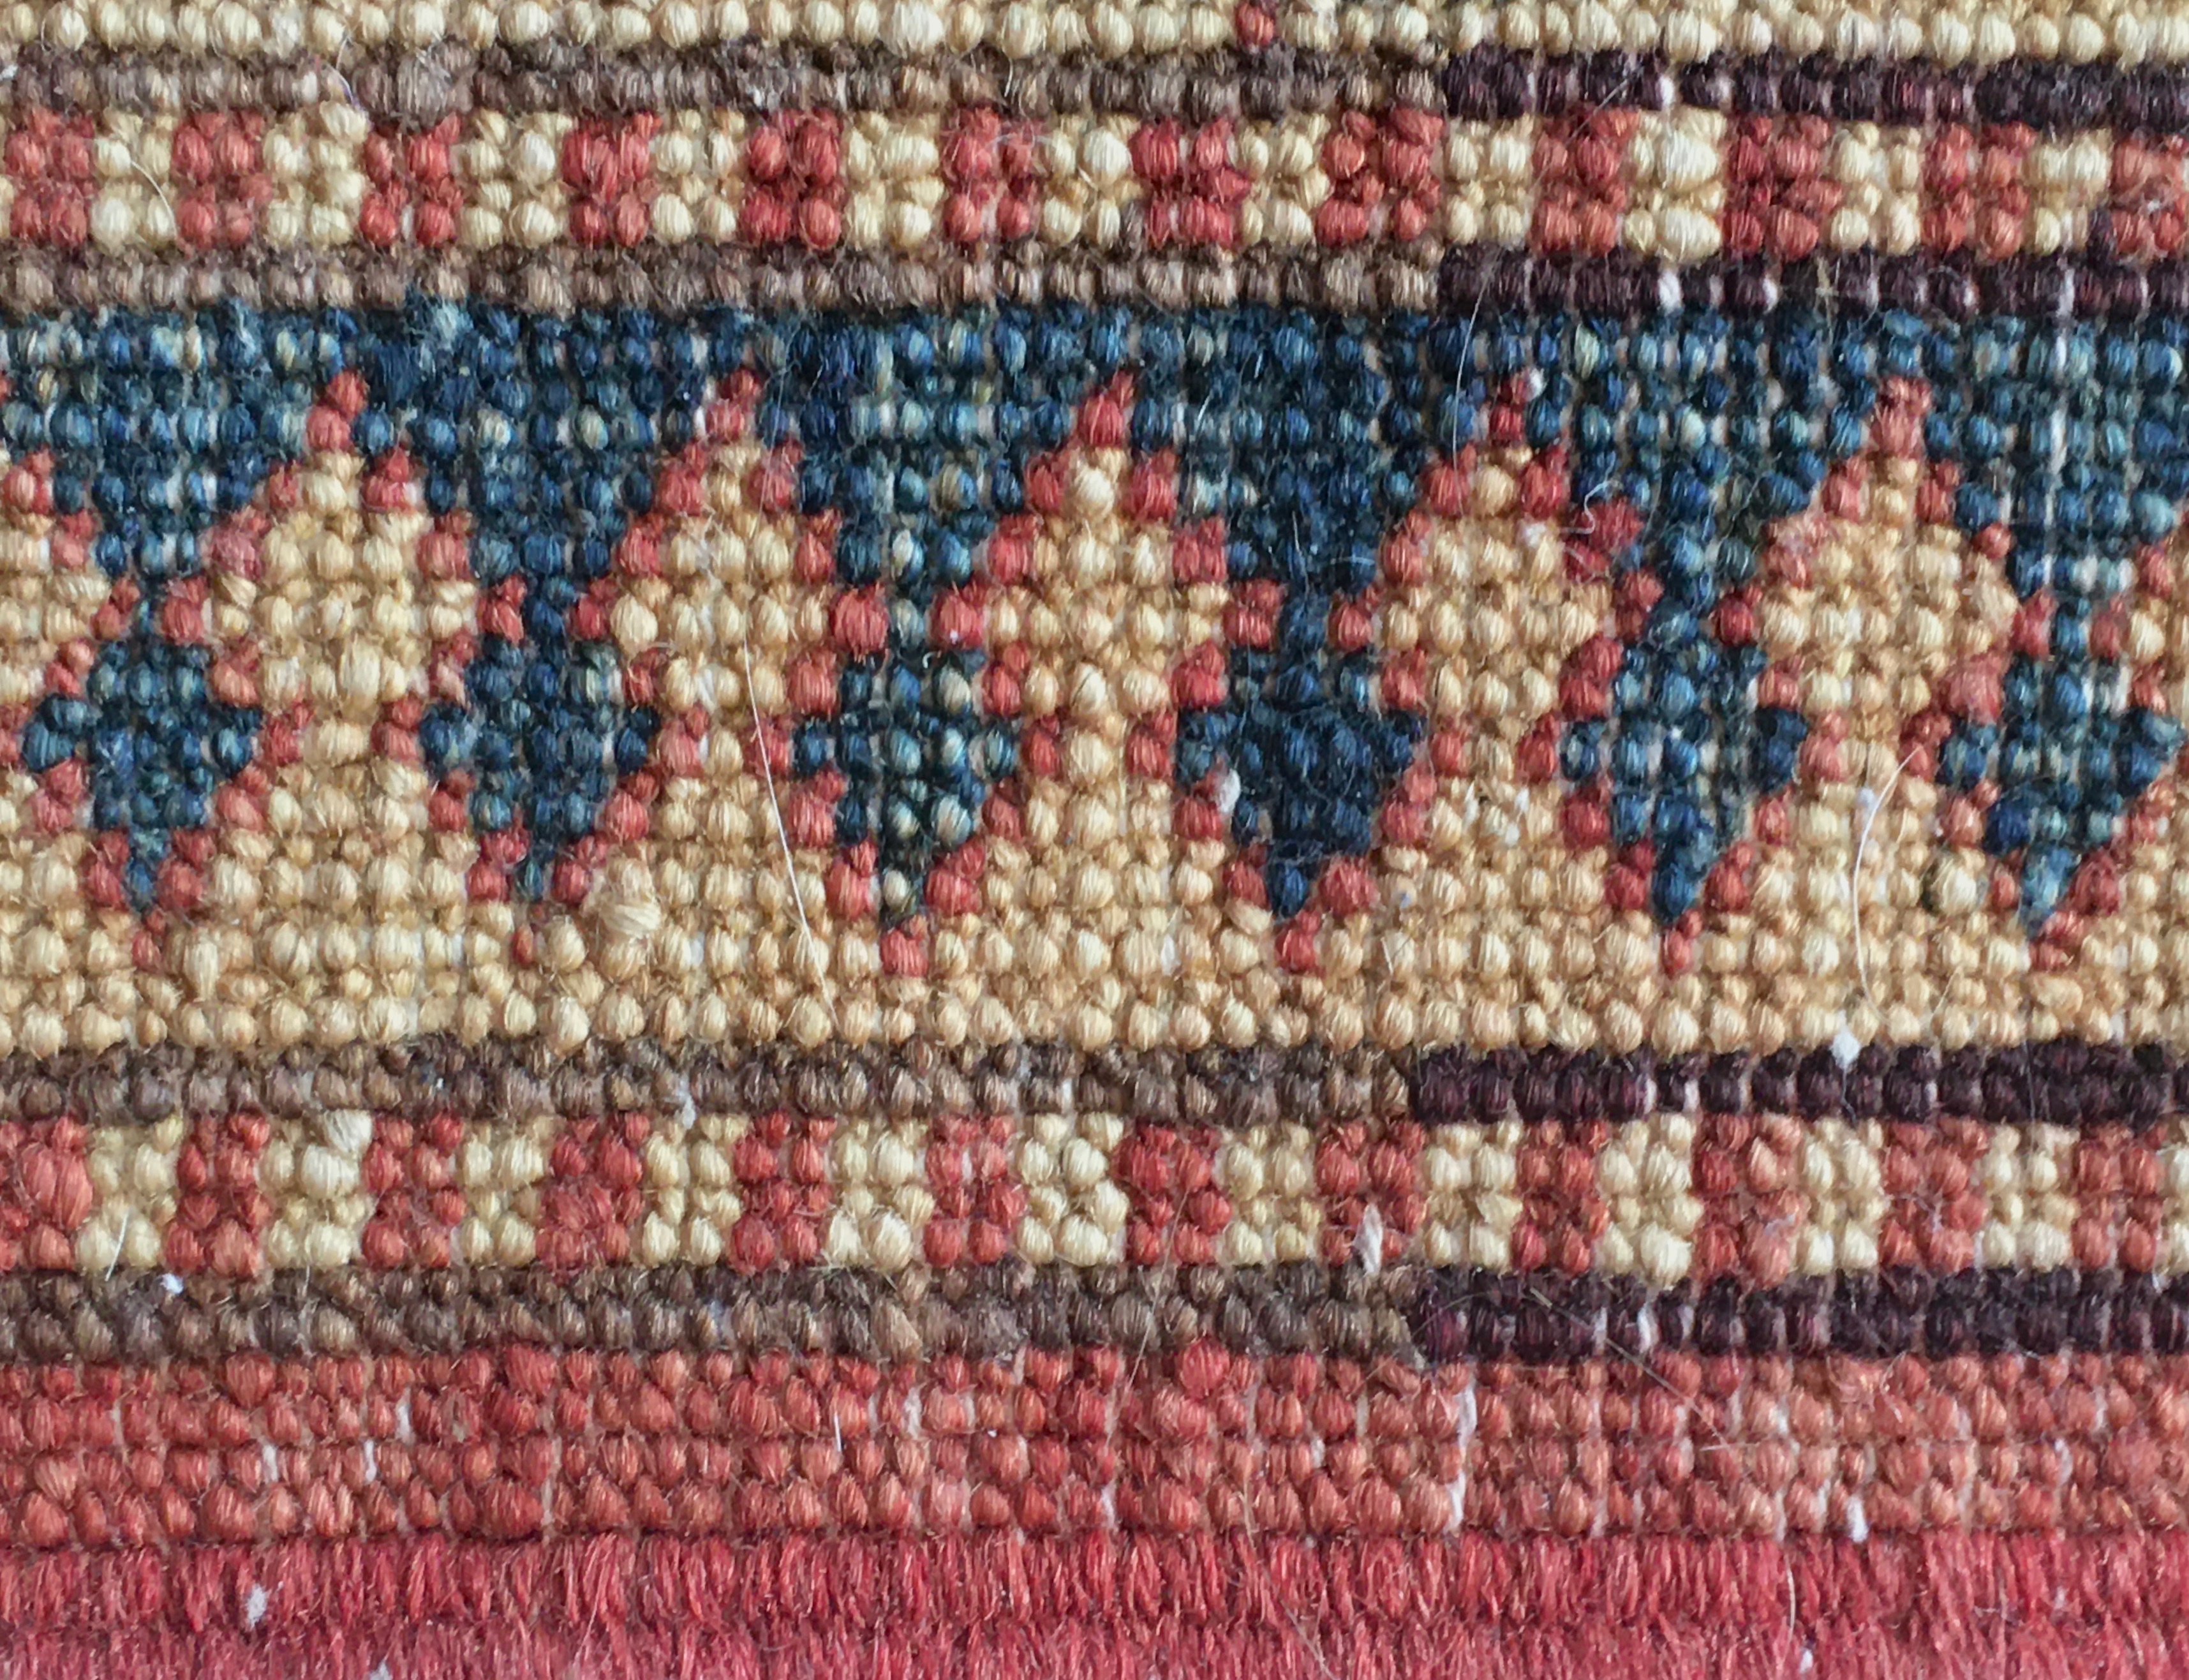 Detailed photo of border rug knots from the back side